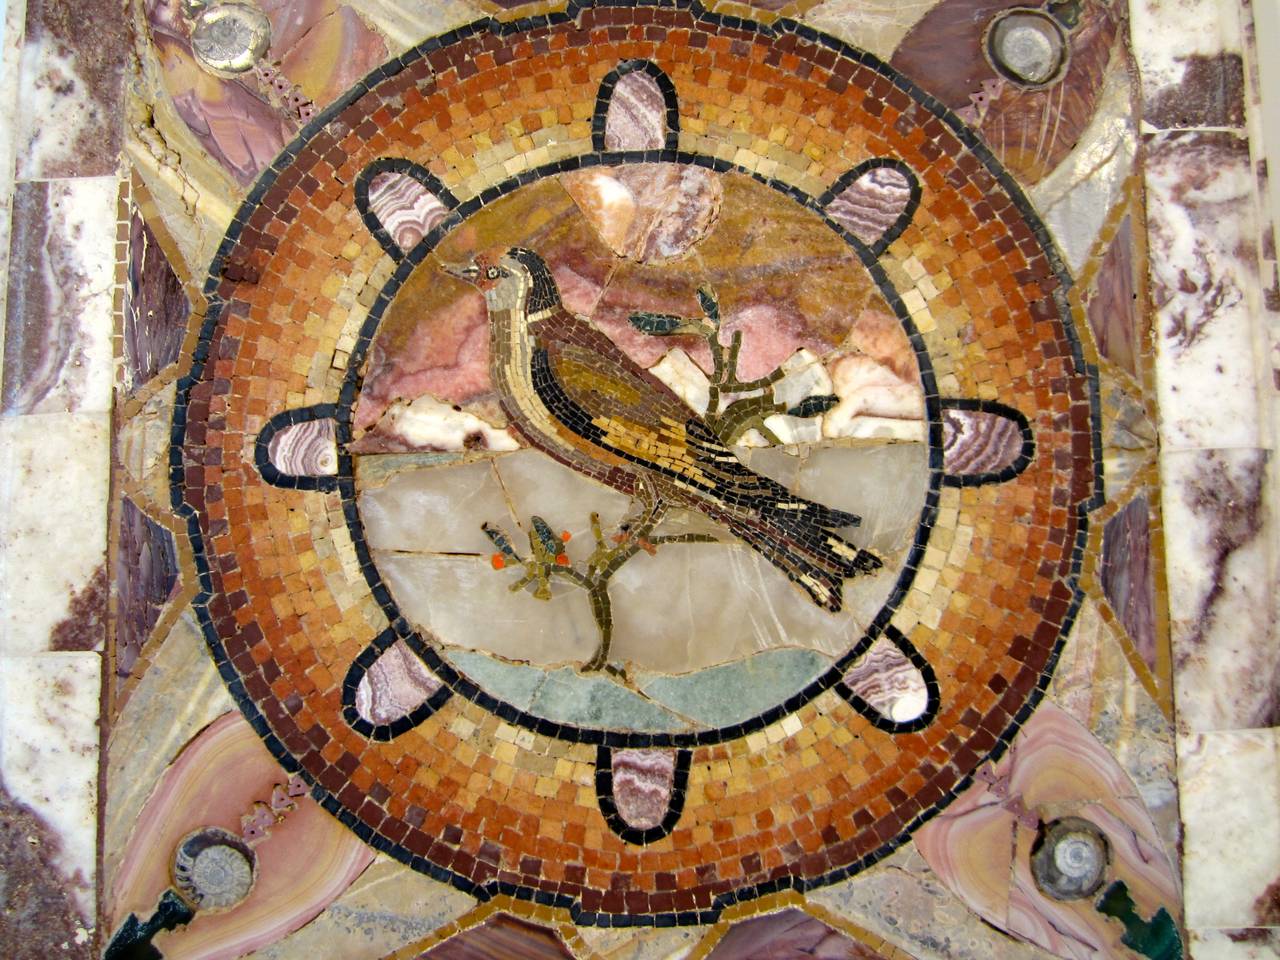 Italian marble inlaid table top made with antiques marble pieces and fossils. In the center a mosaic circle frames a micro mosaic bird, in the style of Pompei mosaico.